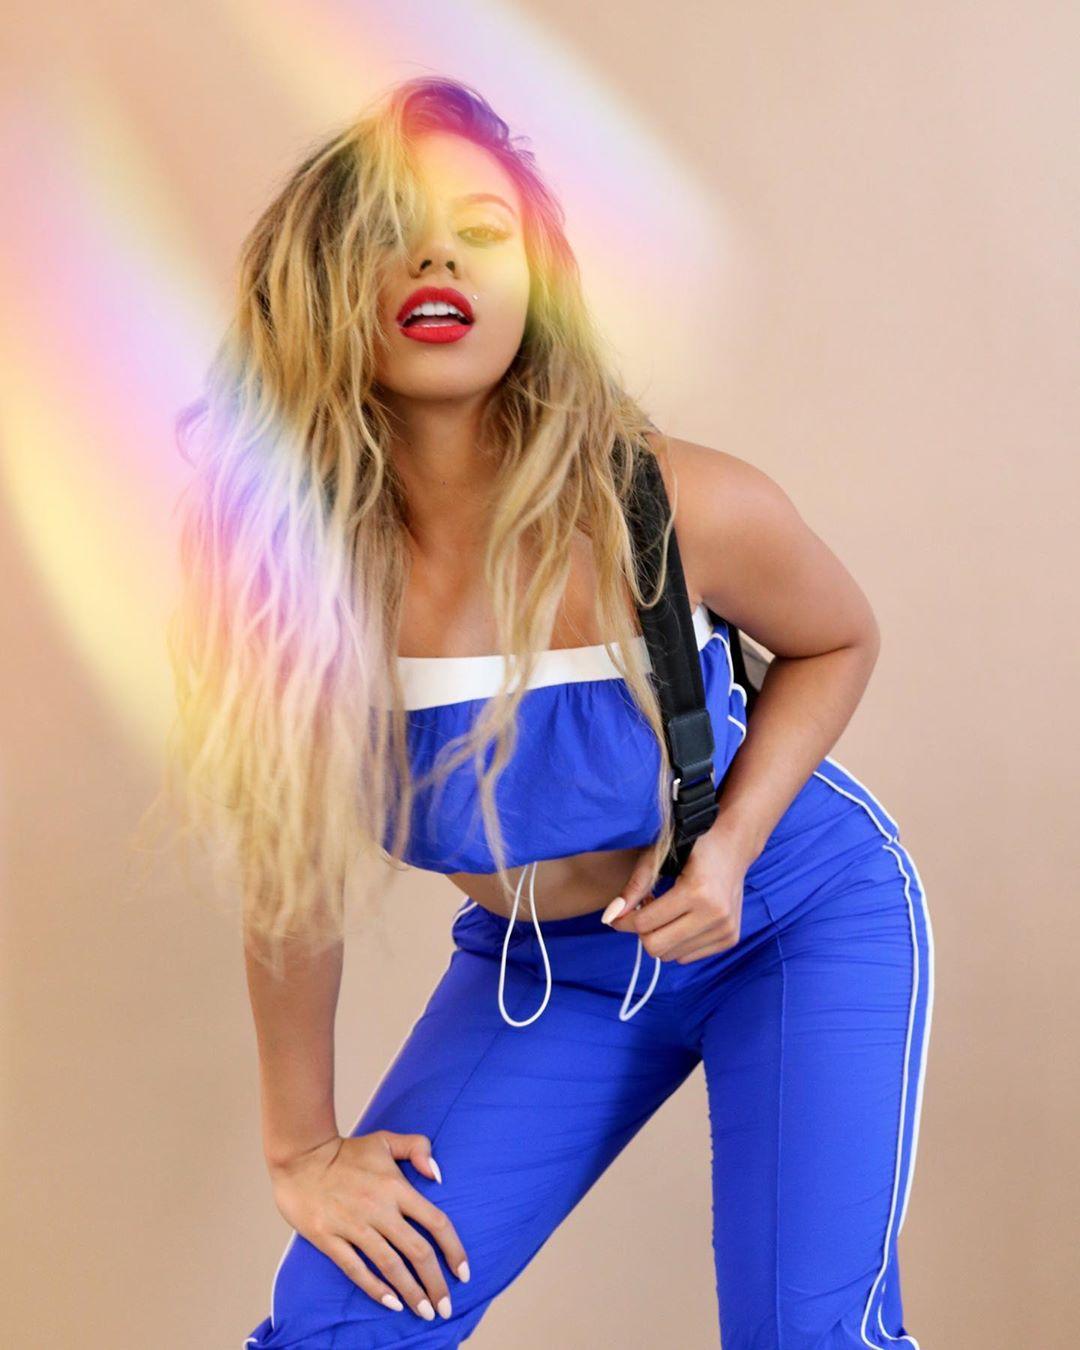 51 Hot Pictures Of Dinah Jane That Will Make Your Heart Pound For Her 8